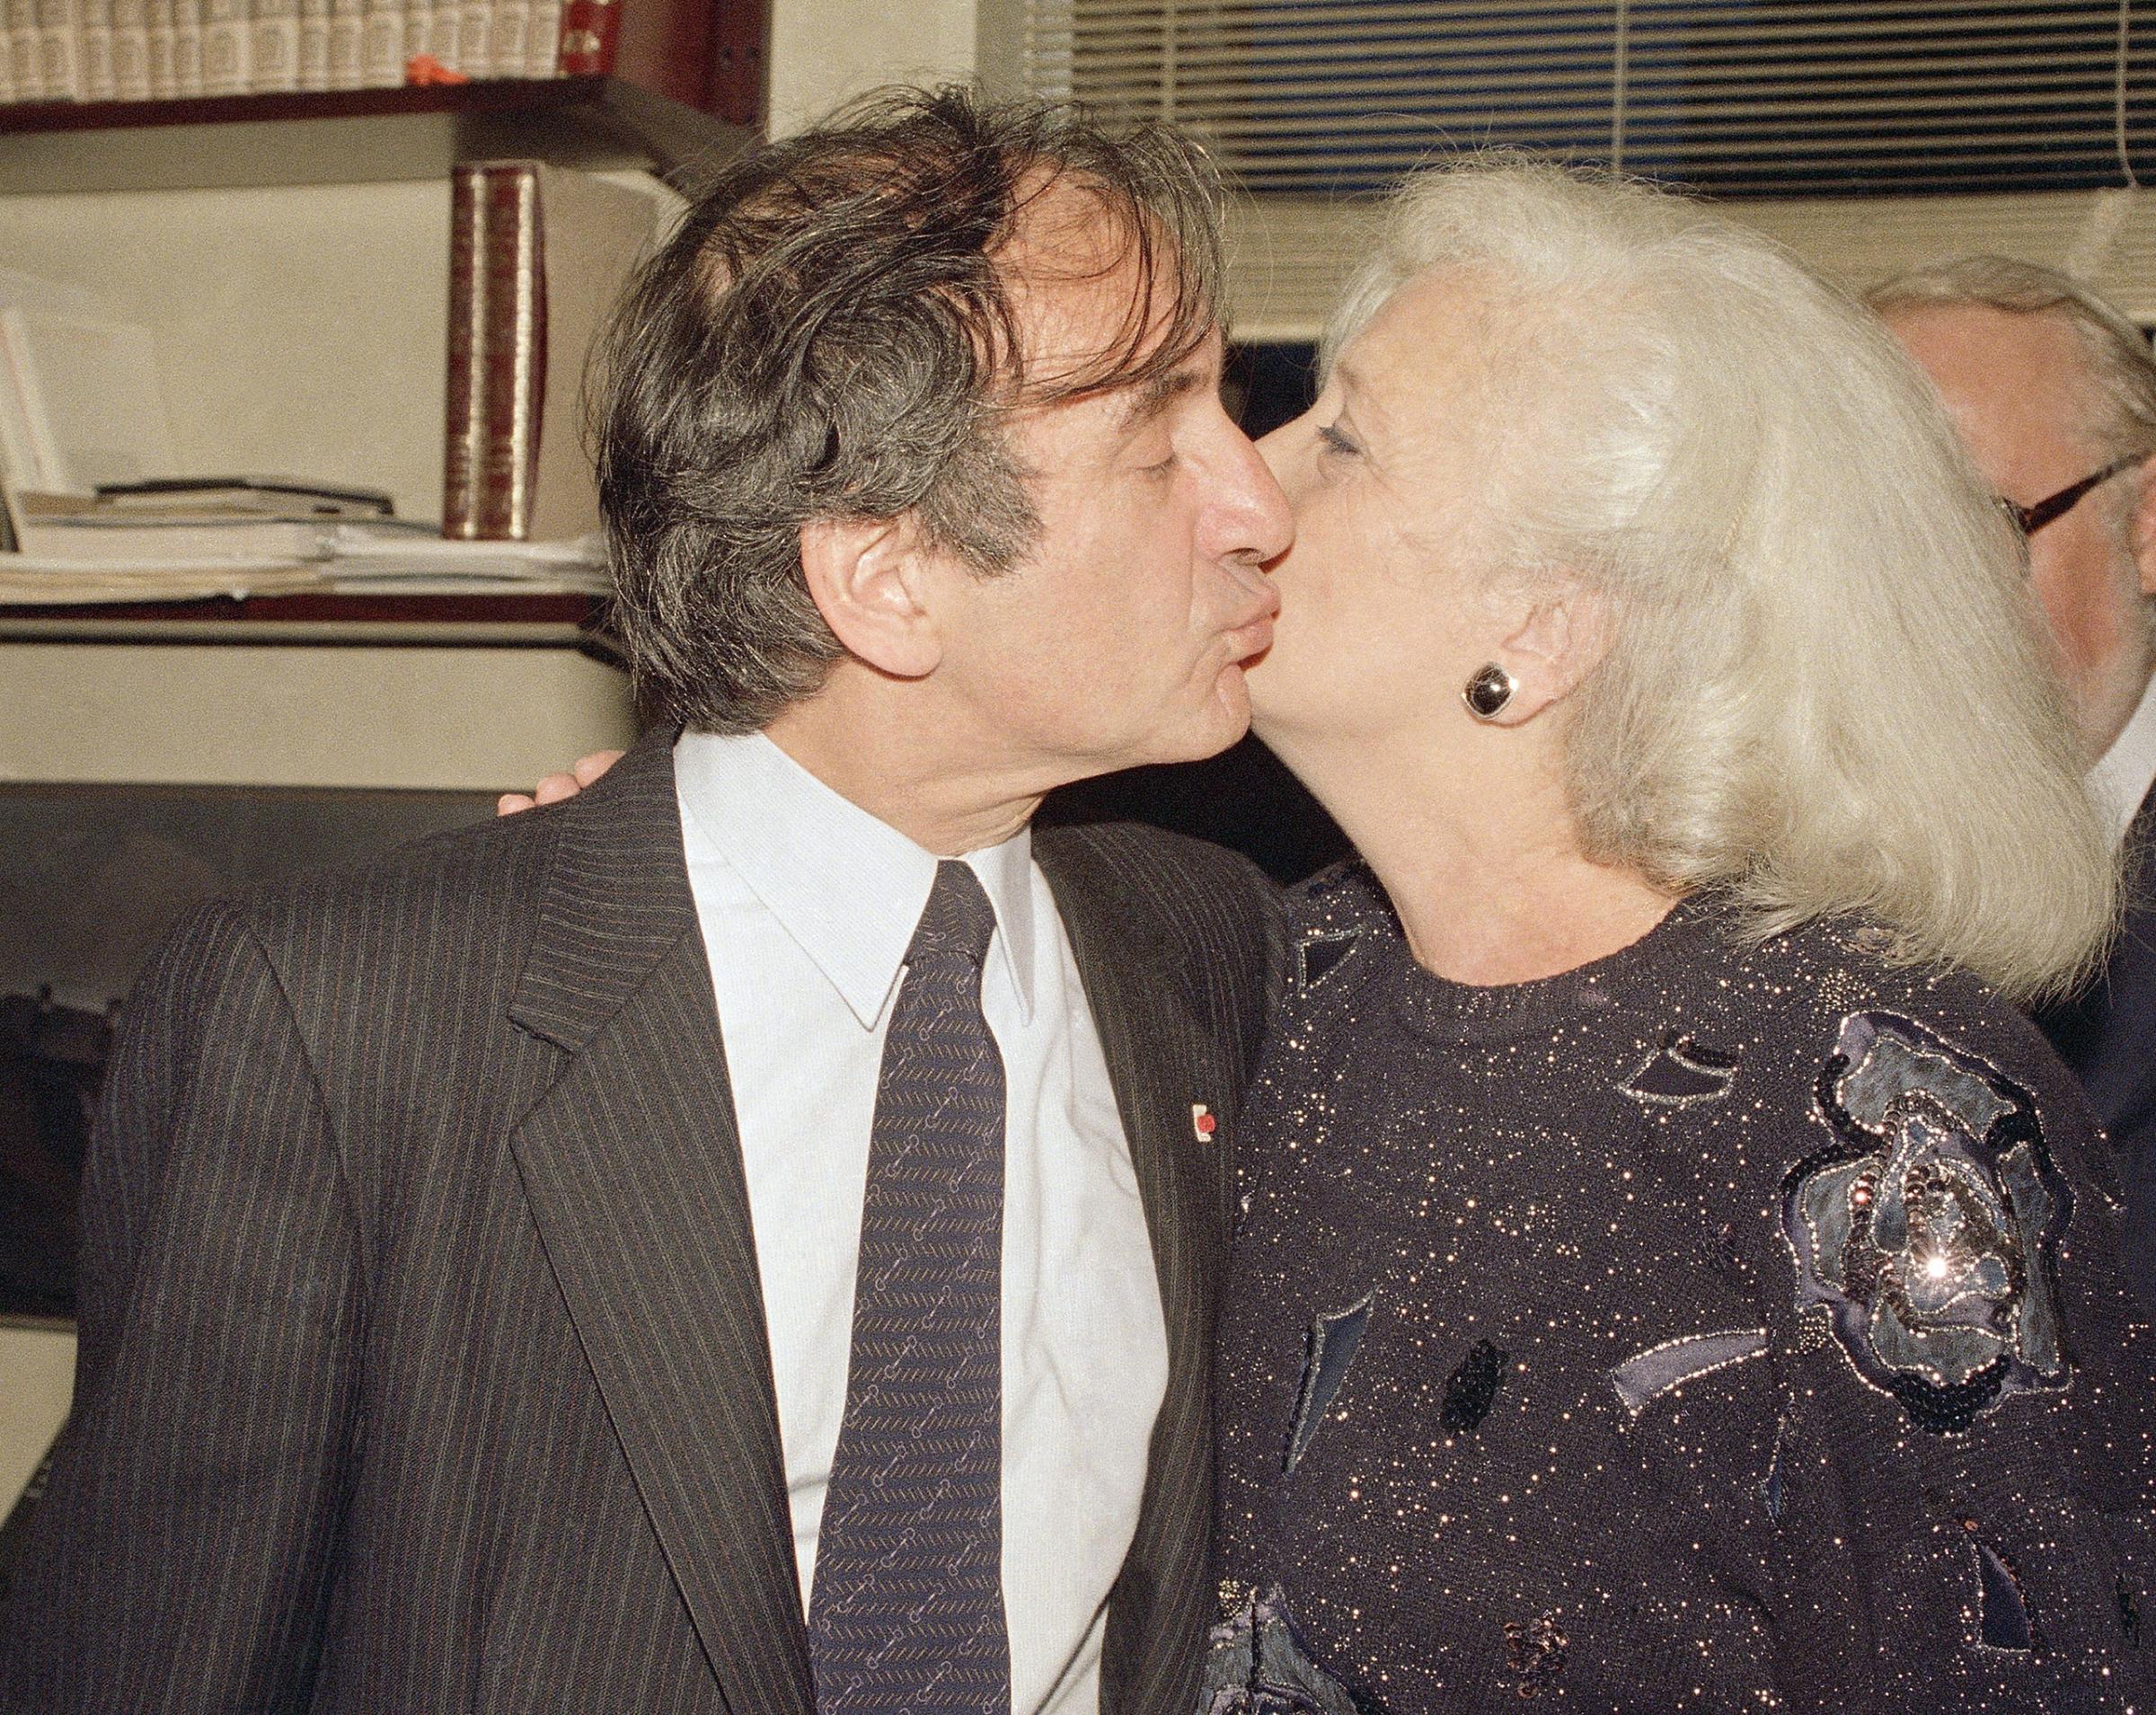 Holocaust survivor Elie Wiesel kisses his wife, Marion, as they greet the press after the Nobel announcement in their apartment in New York City on Oct. 14, 1986.